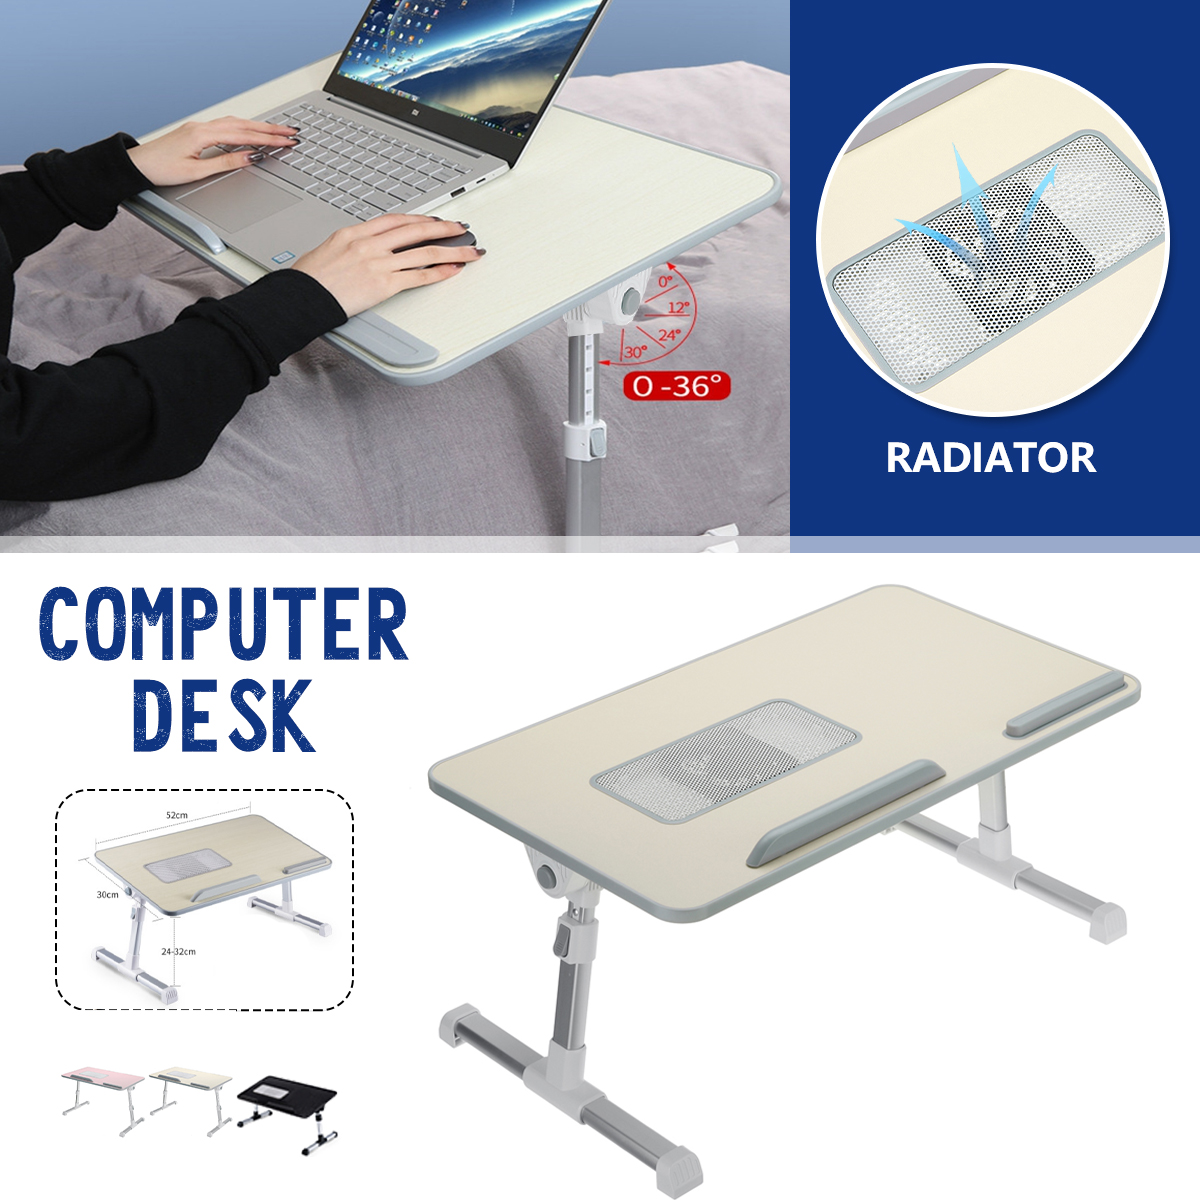 Folding-Laptop-Bed-Table-Dorm-Desk-Couch-Table-with-Cooling-Fan-Breakfast-Tray-Notebook-Stand-Readin-1796247-1